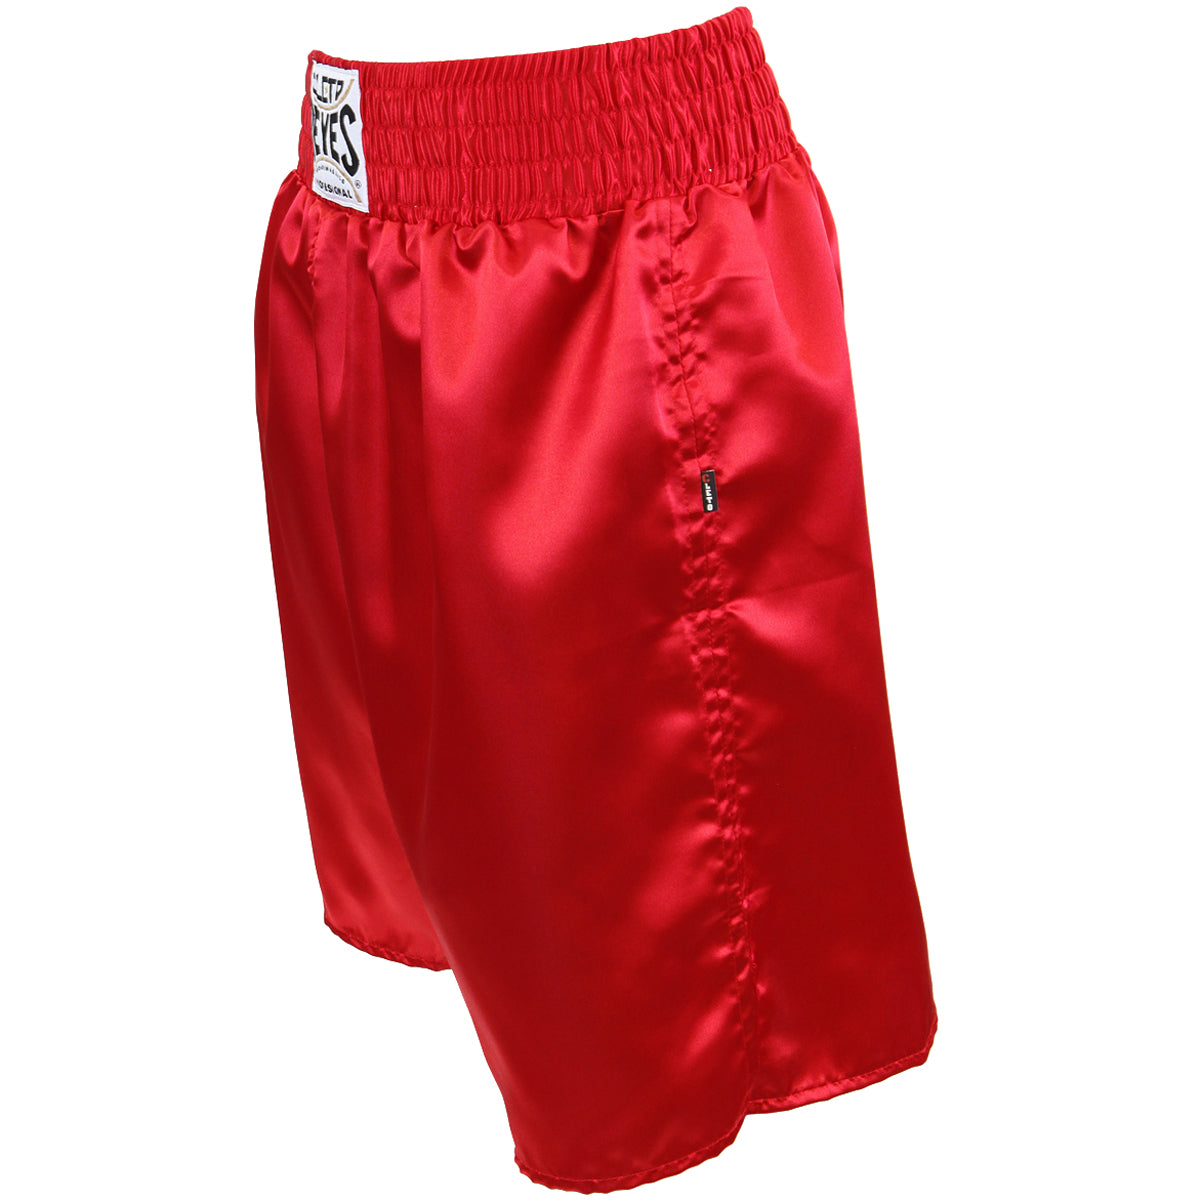 Cleto Reyes Satin Classic Boxing Trunks - Small (32") - Red Cleto Reyes